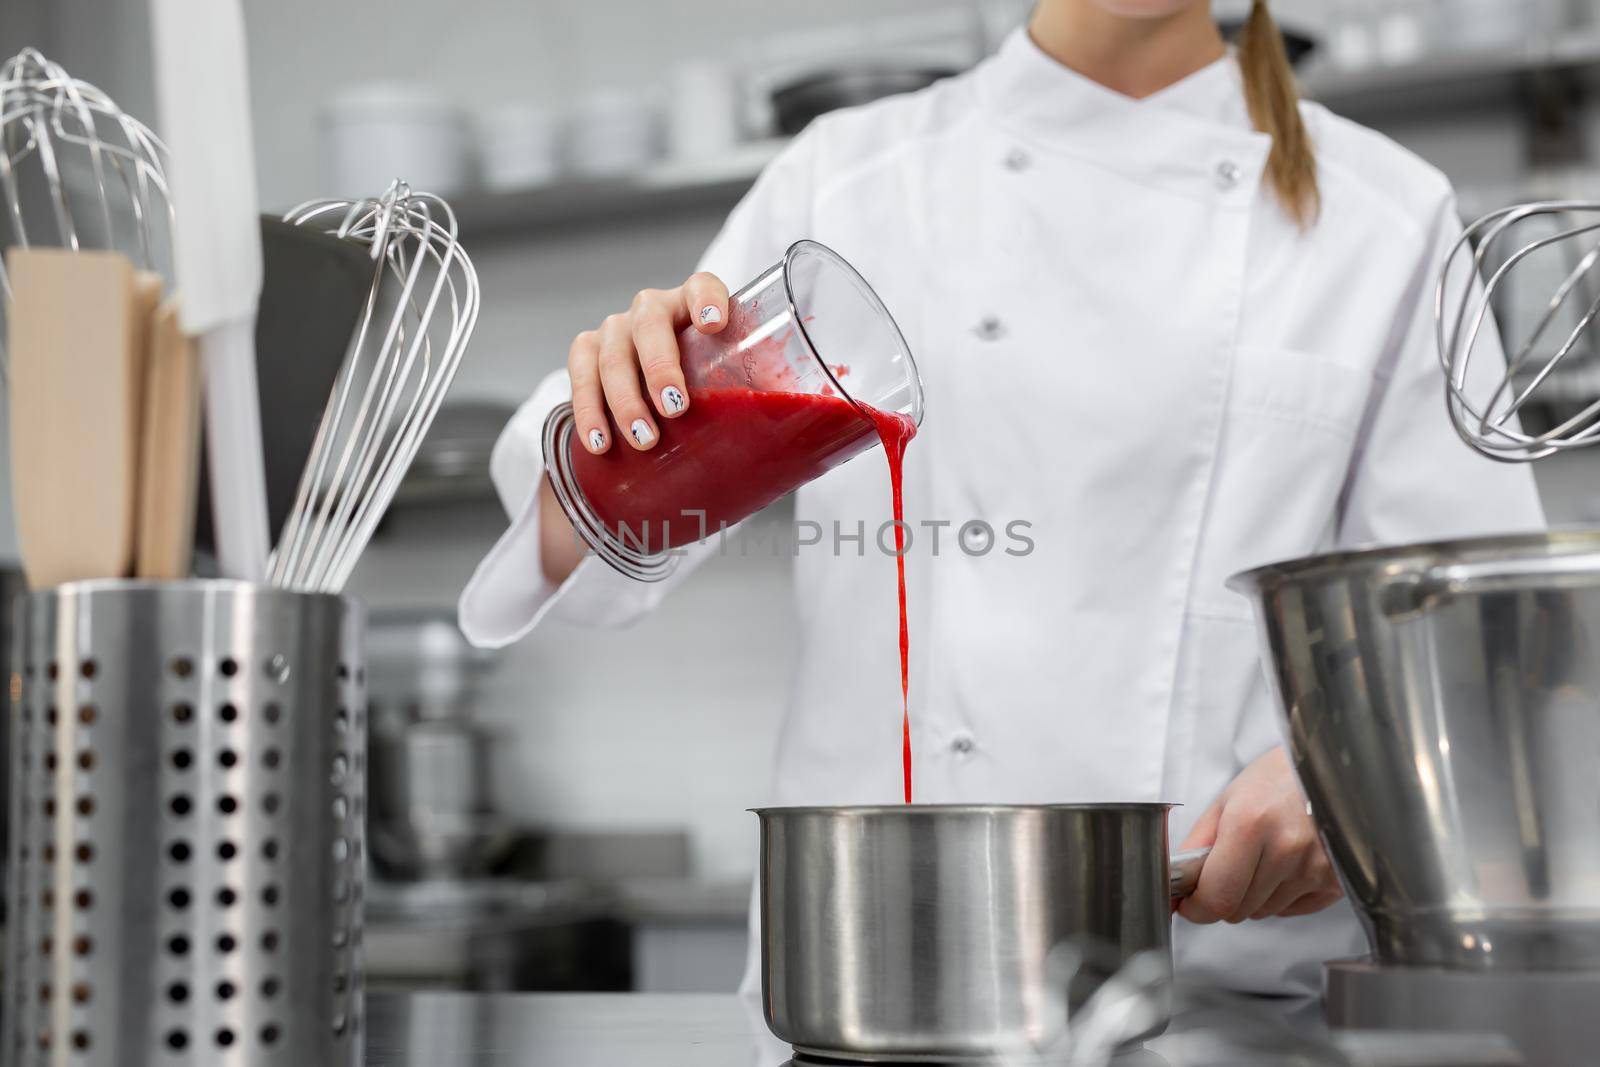 Pastry chef pours strawberry puree into a saucepan by StudioPeace